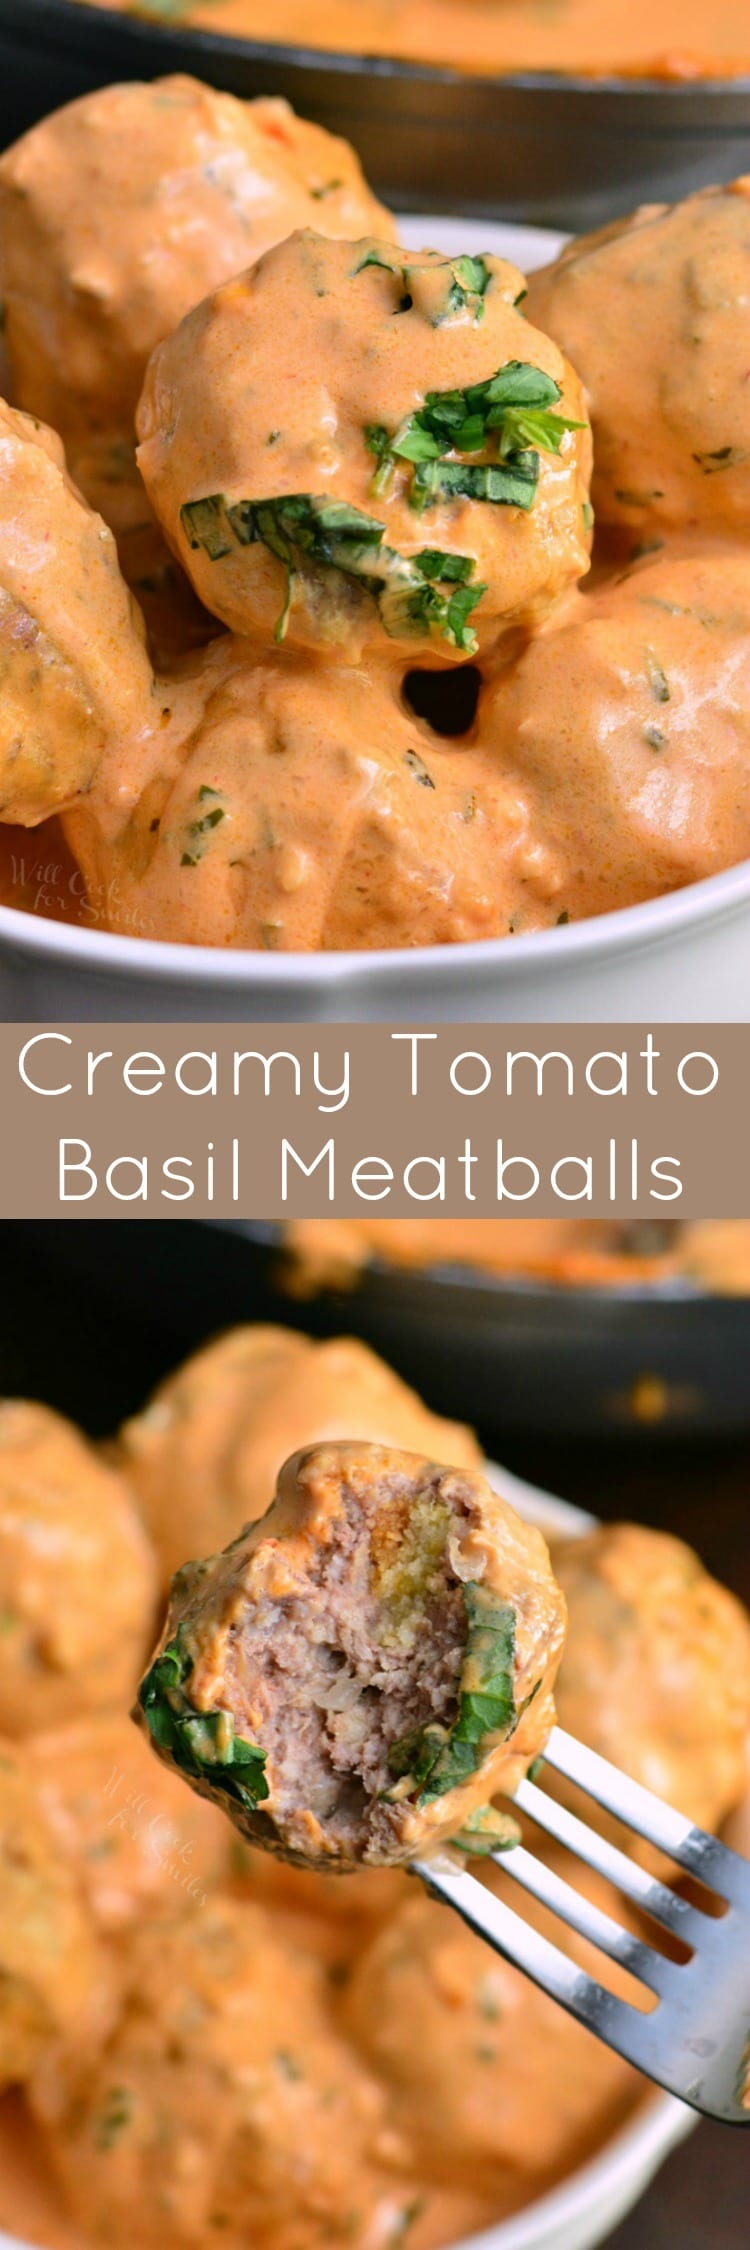 collage, First picture is of Creamy Tomato Basil Meatballs in a ball 2nd picture is a meatball on a fork with a bite taken out 